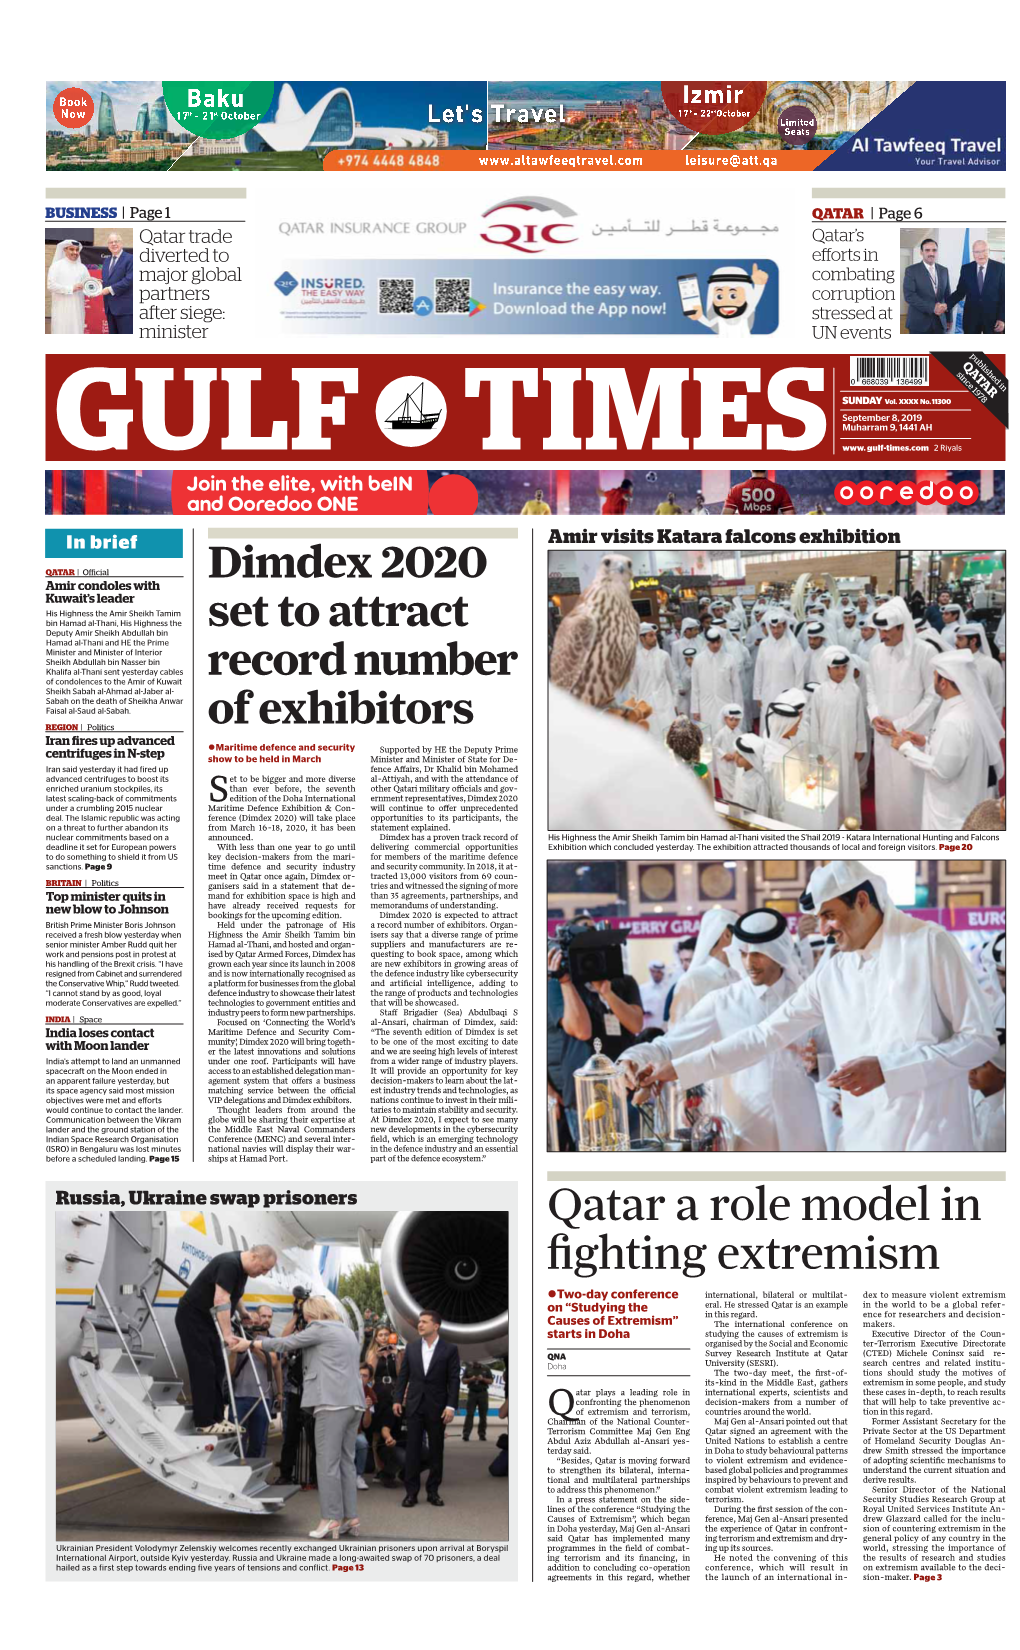 Qatar a Role Model in Fighting Extremism